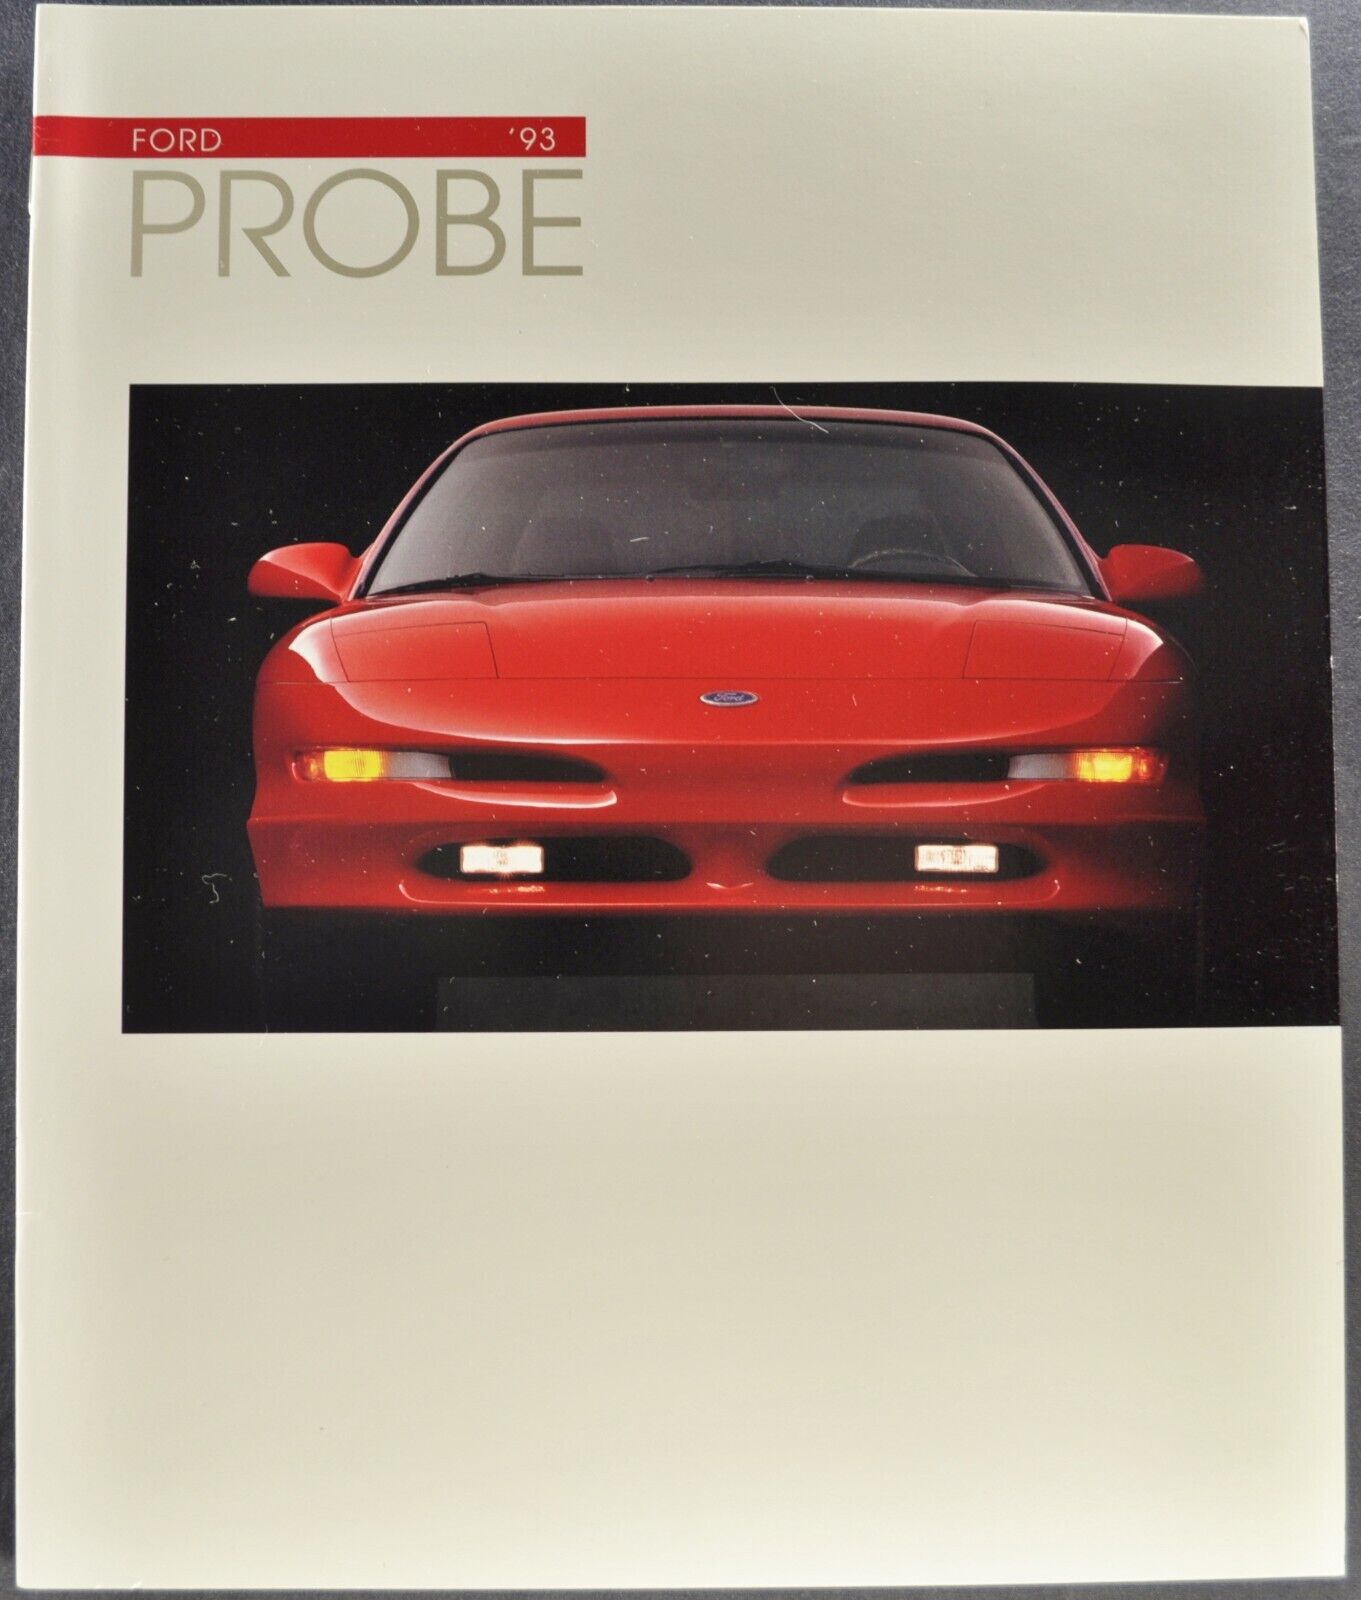 1993 Ford Probe Catalog Brochure GT Coupe Excellent Original 93